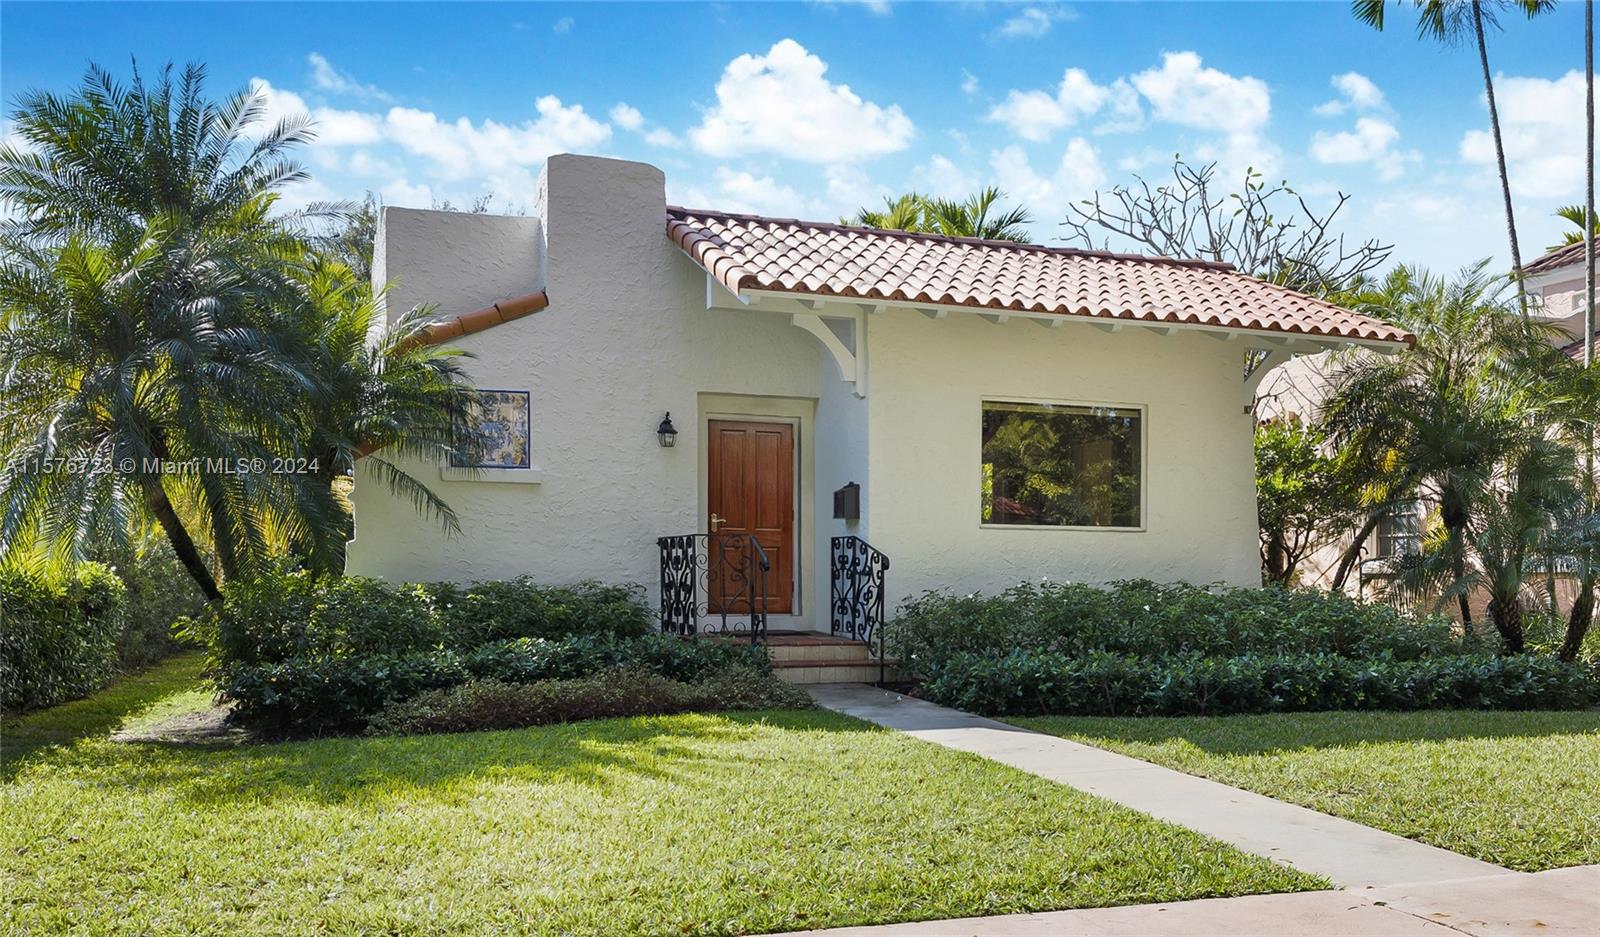 Situated in a PRIME location, on a beautiful, tree lined street in Coral Gables, this historic home designed by H. George Fink, is located steps from Granada Golf Crs, Biltmore Hotel, Salvadore Tennis Park & Coral Gables Country Club.This updated modernized 2 bedrm home with add'l den/library features impact windows & doors. Open floor plan featuring spacious living rm/dining area. The oversized primary bdrm includes a walk-in closet & offers private garden vistas thru French doors w/ sidelights. The master bath is luxurious w/ shower & double sinks. The kitchen includes panel ready & fully integrated top of the line appliances w/green tea granite countertops. Enjoy breakfast or cocktails on the back patio. Second bdrm works as a guest room or office with built in desk and library/bookcase